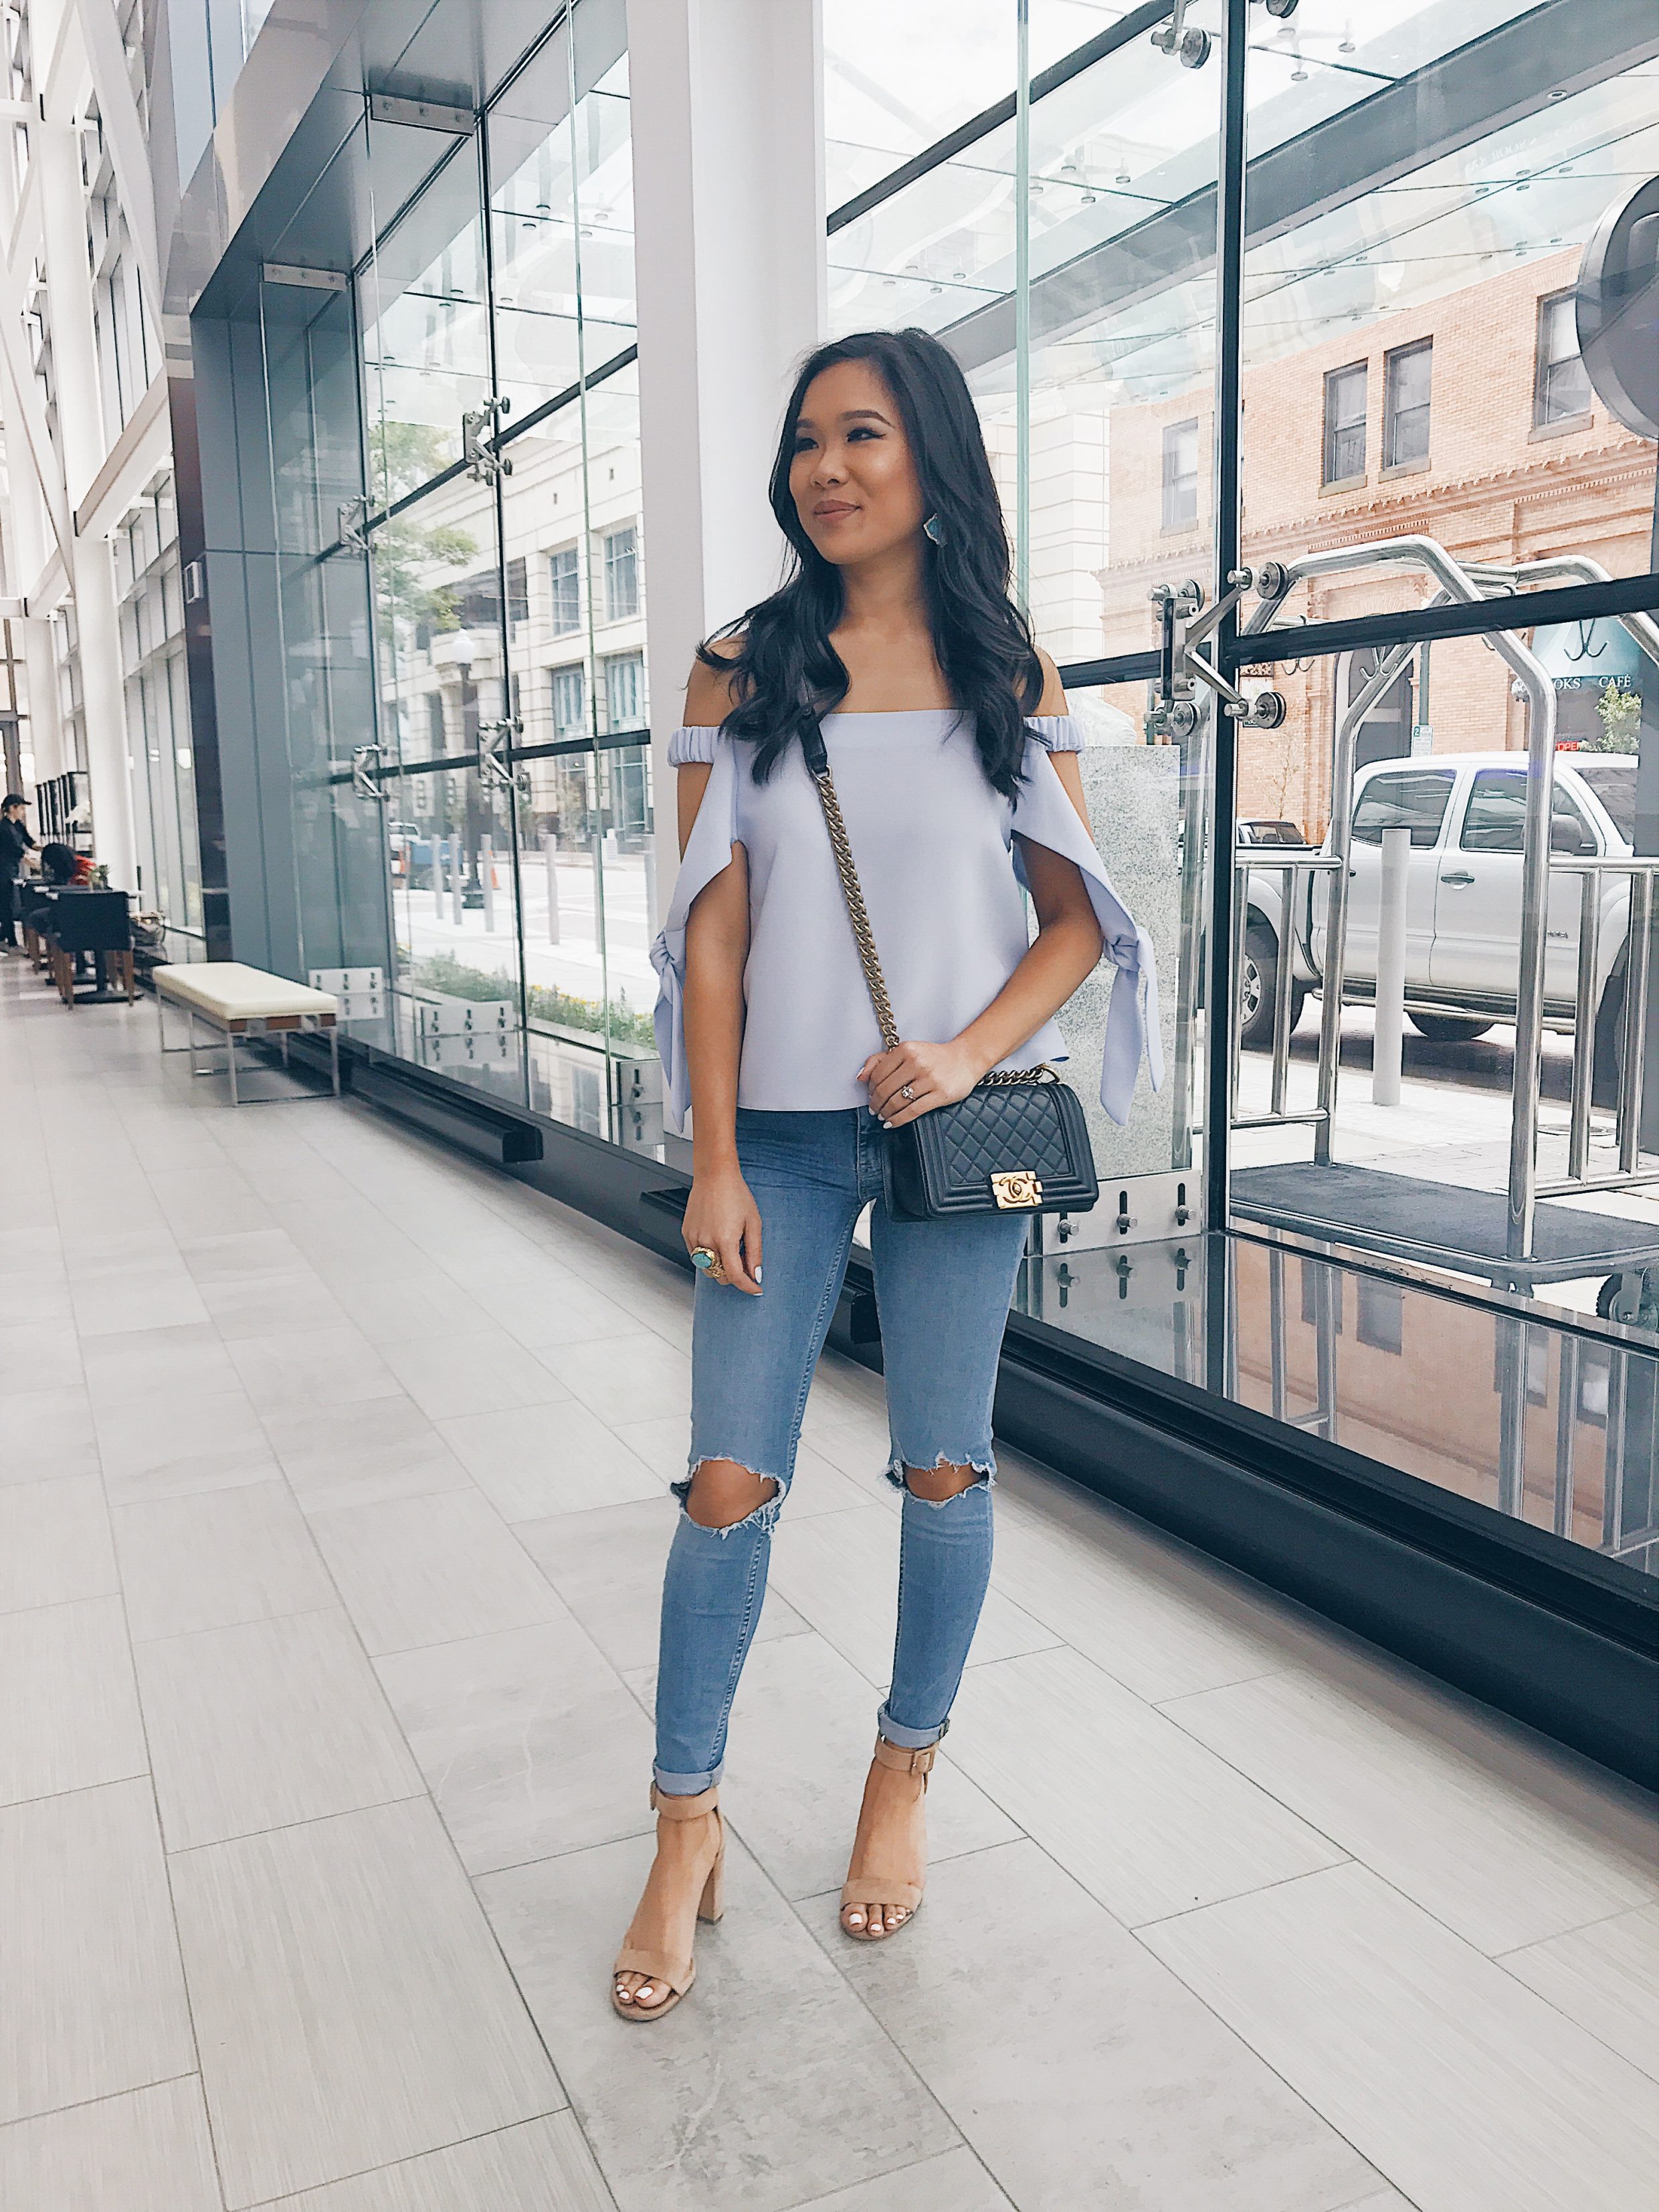 Blogger Hoang-Kim at Hilton Norfolk The Main in a Topshop bardot top, free people jeans and Ann Taylor heels with a Chanel bag